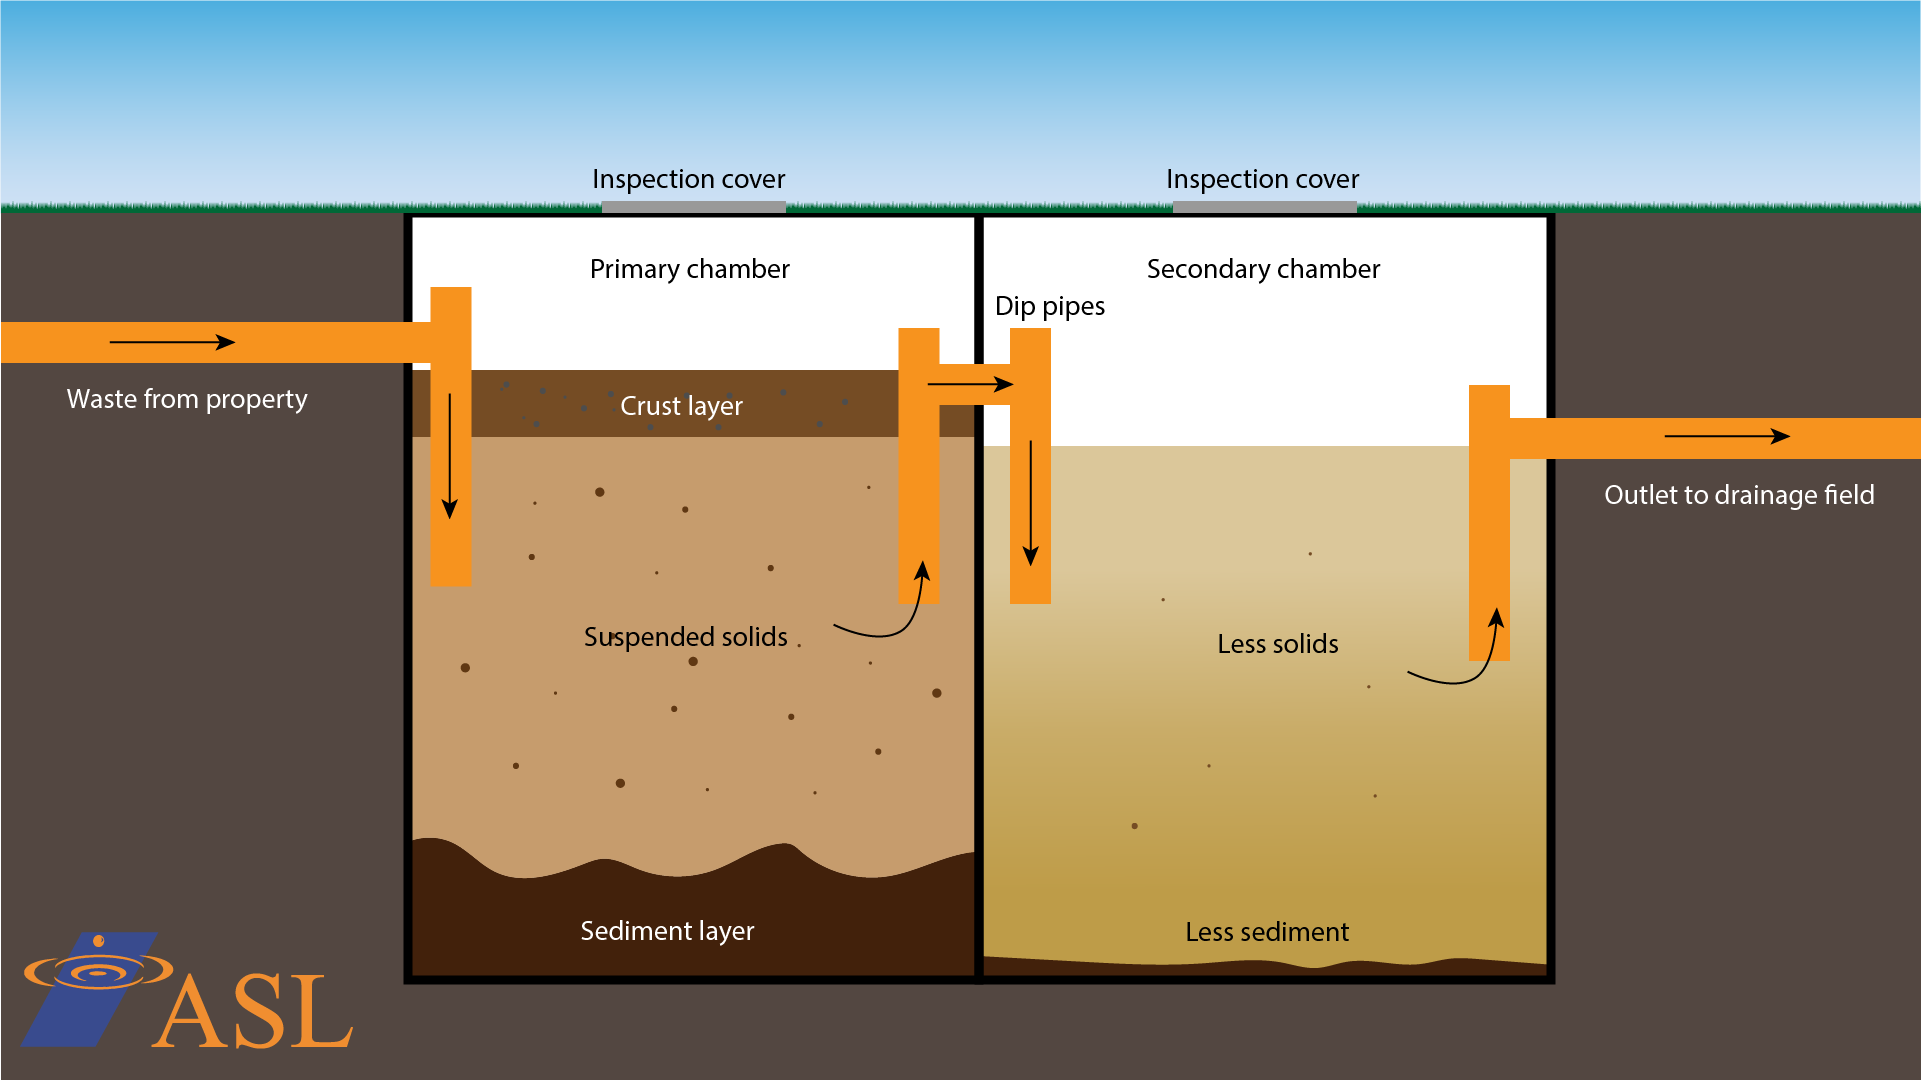 Diagram with optimal levels of wastewater for septic tanks.